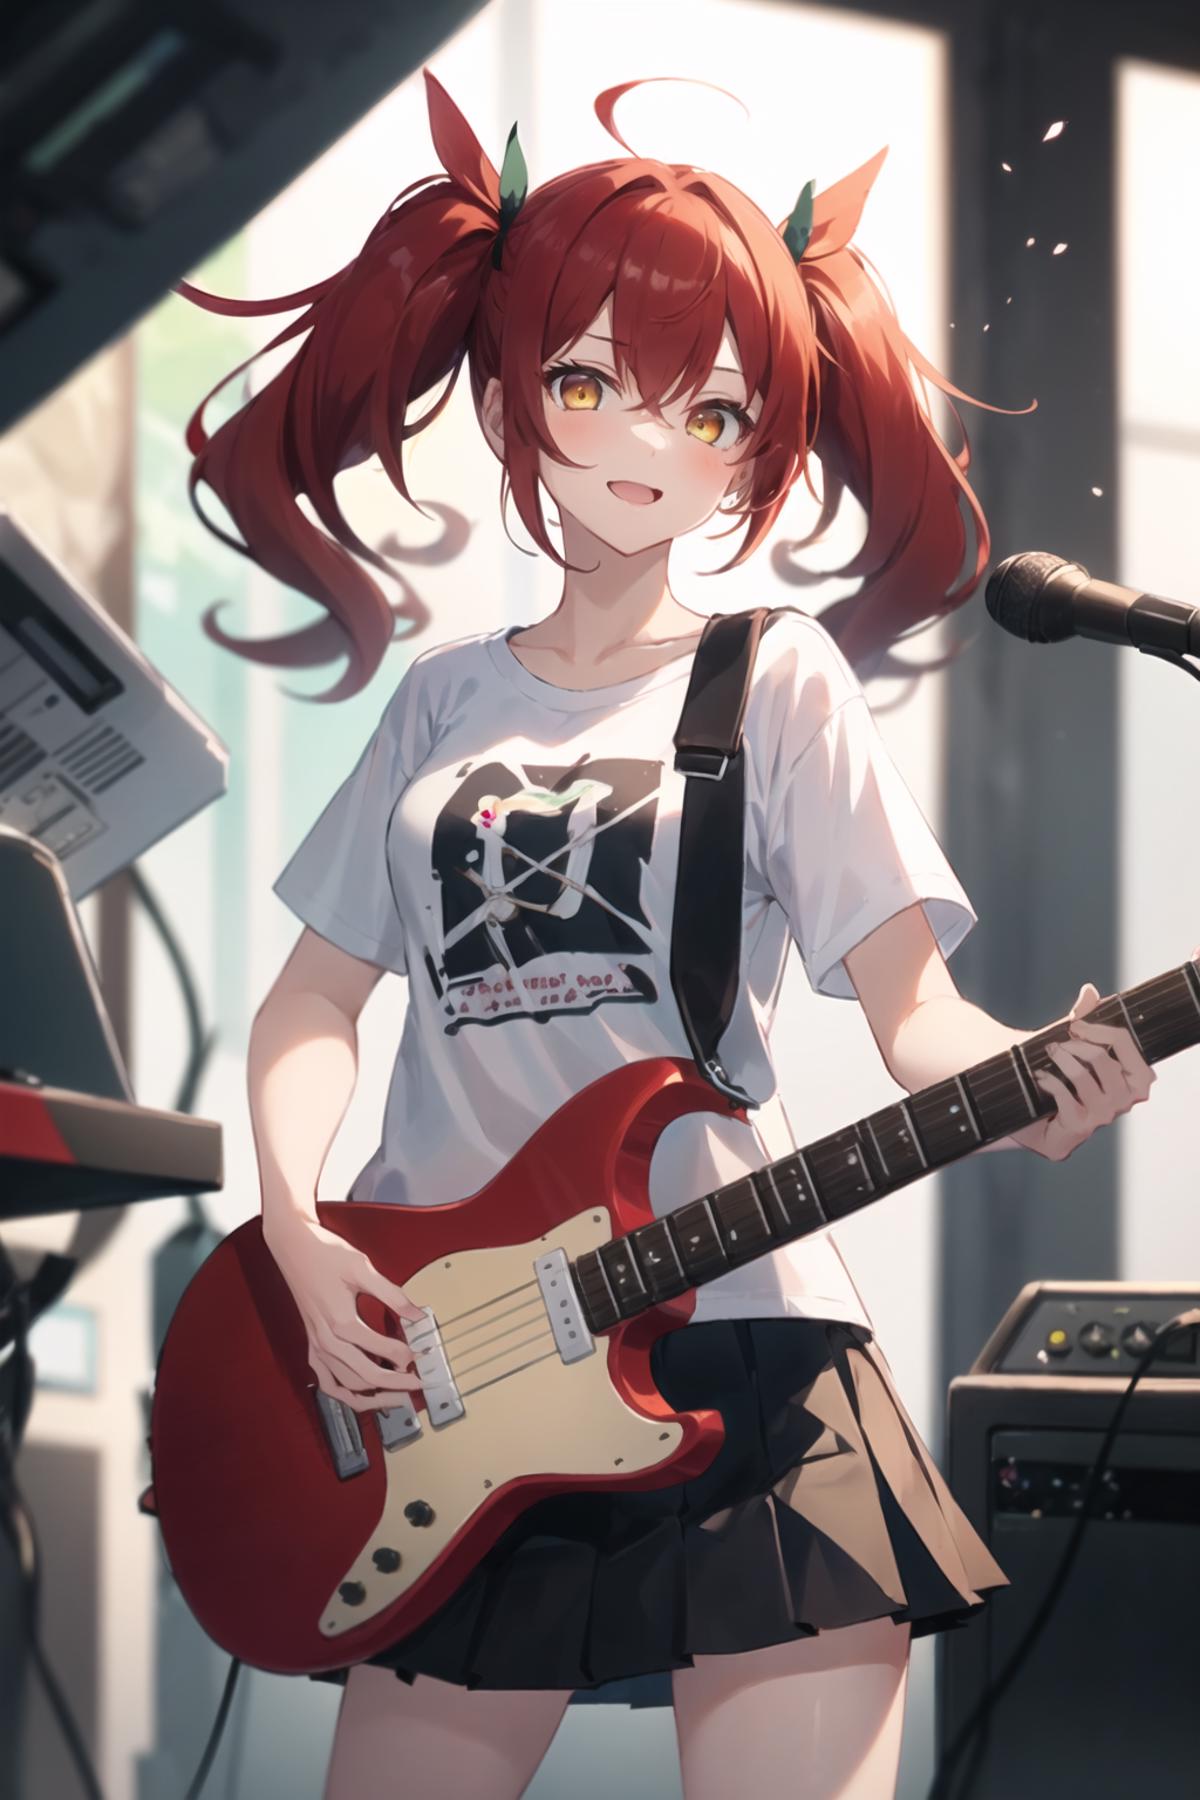 [OpenPose + Lineart] Playing Guitar image by BlazzzX4